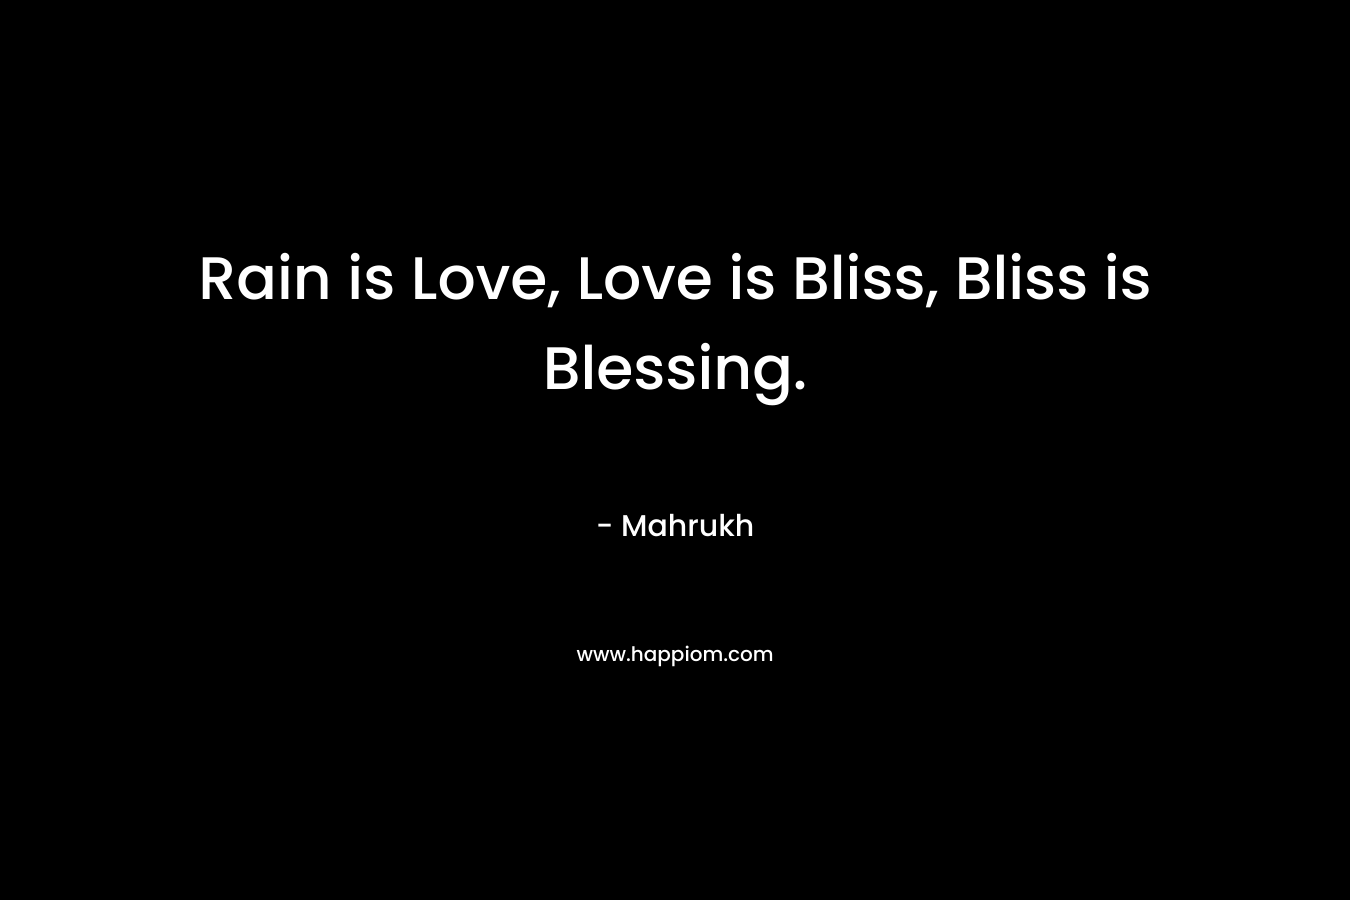 Rain is Love, Love is Bliss, Bliss is Blessing.